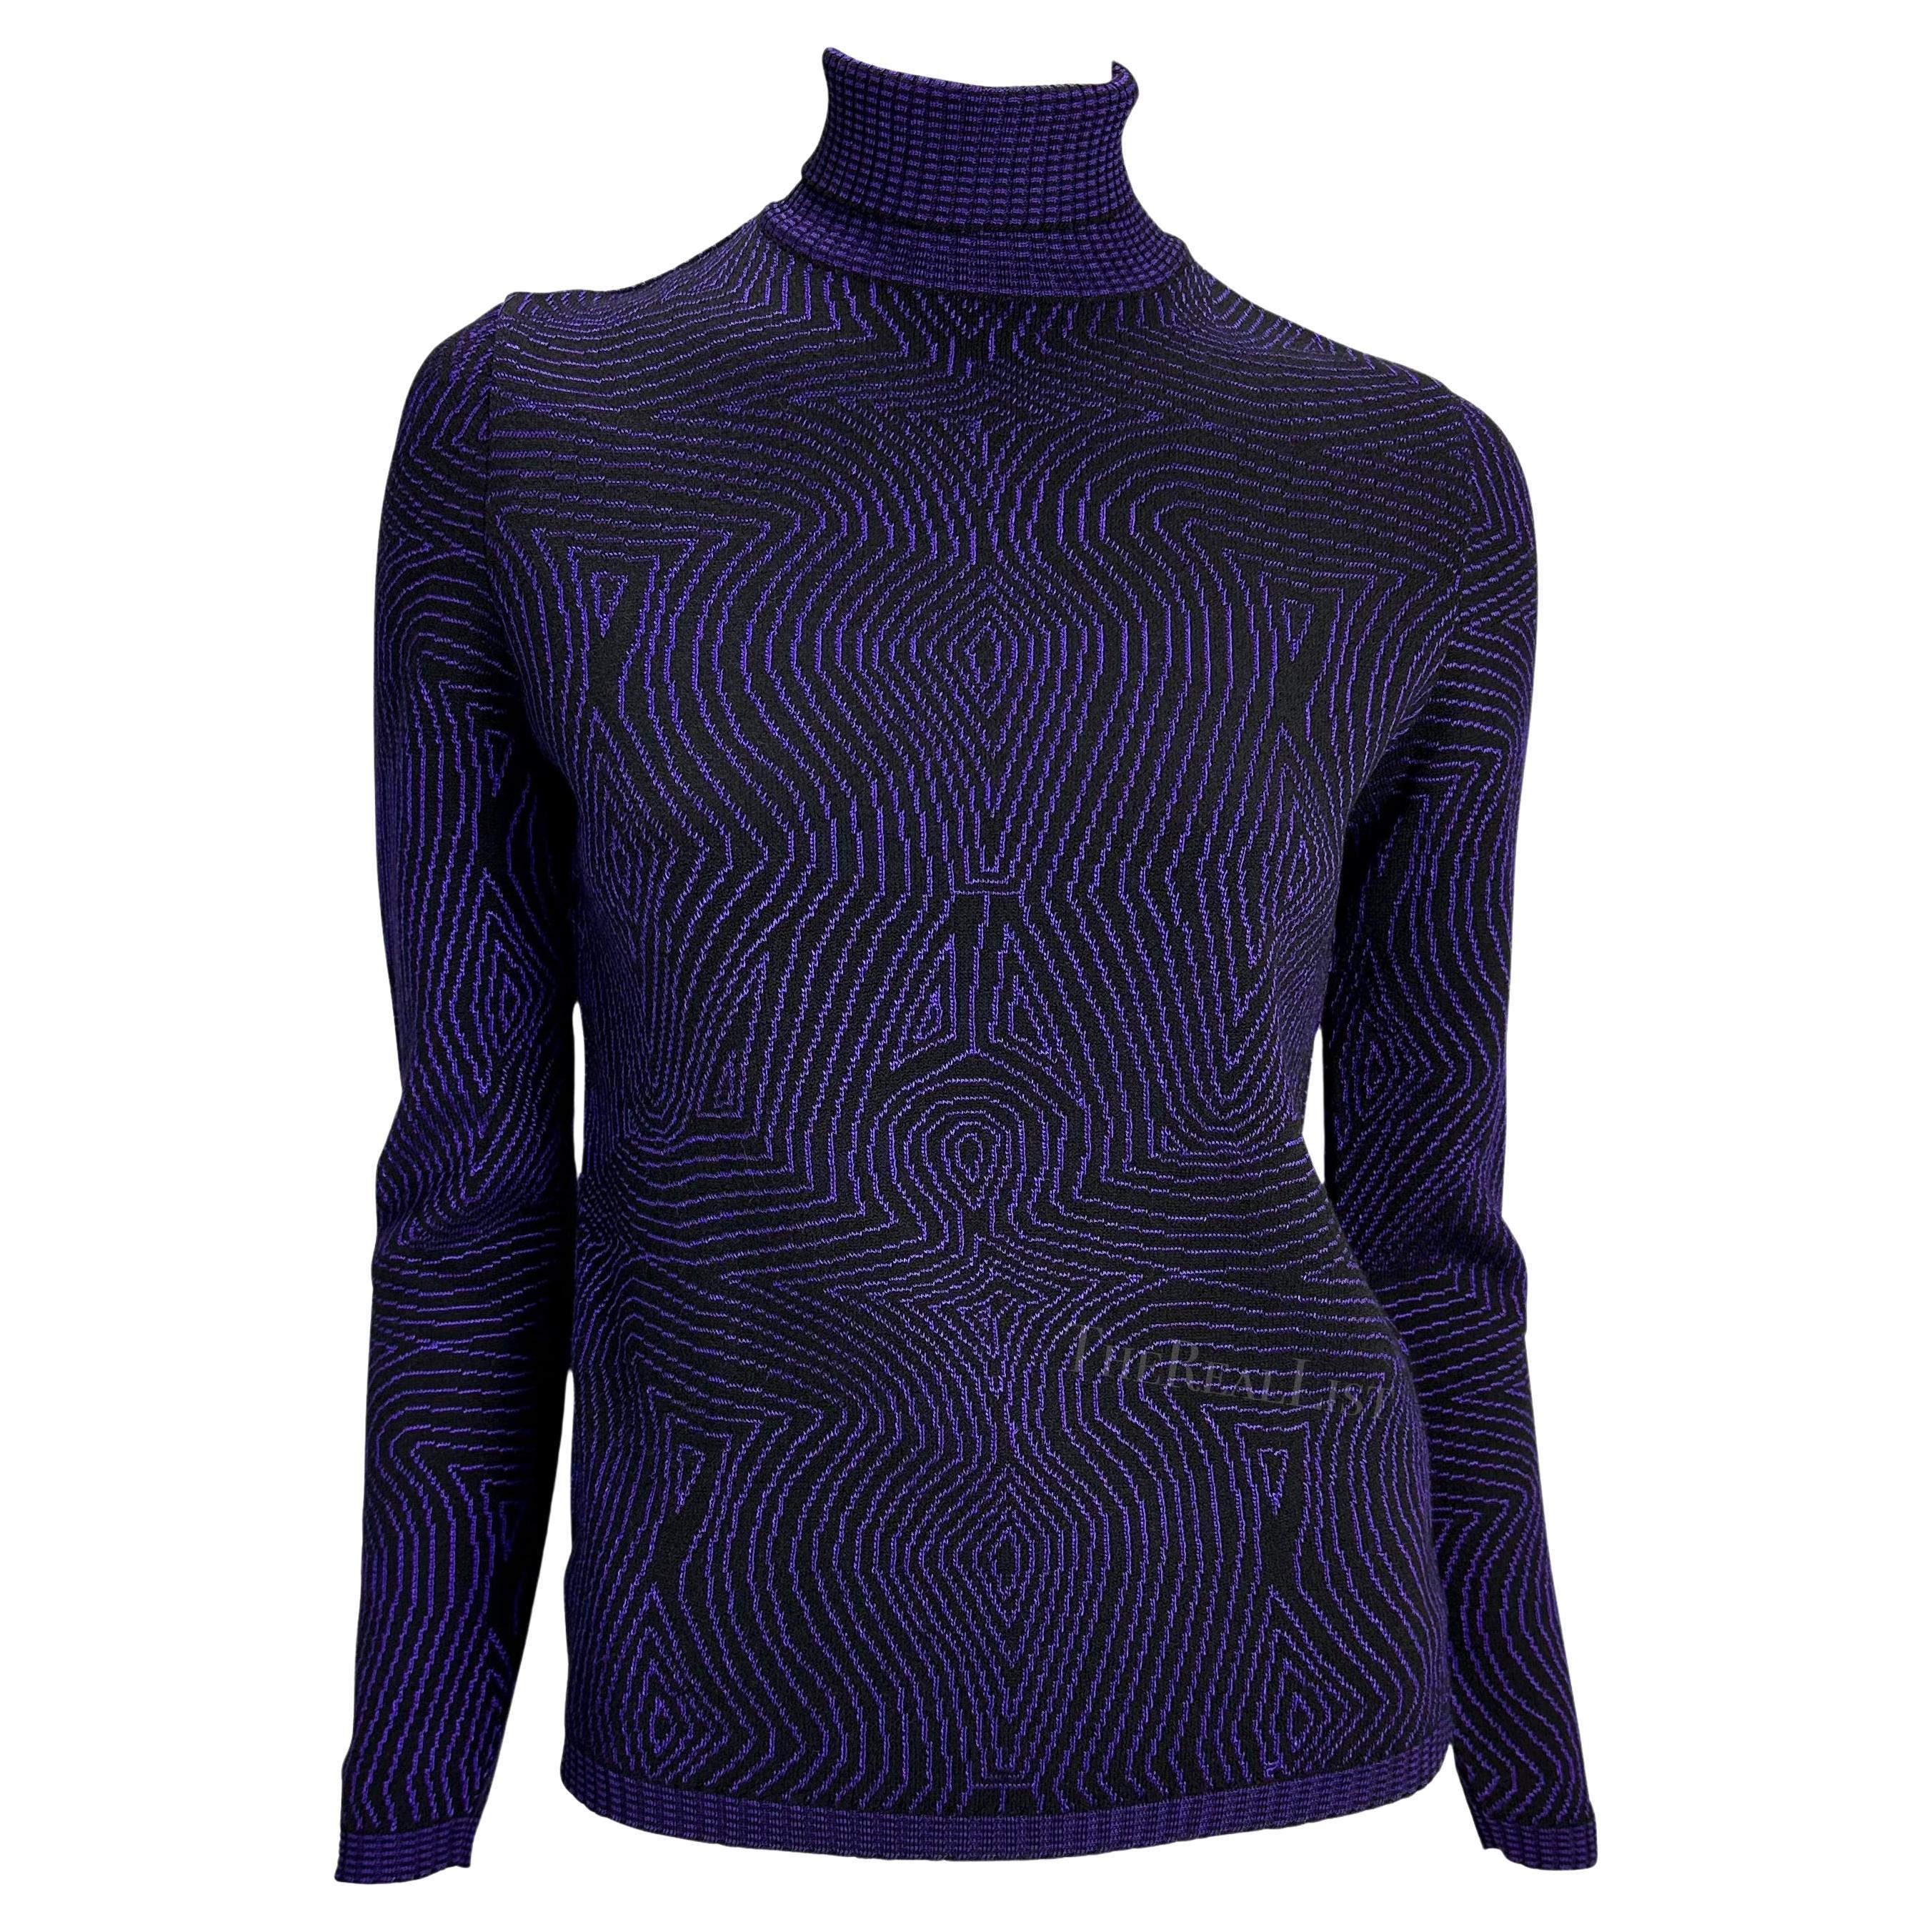 1996 Gianni Versace Purple Psychedelic Op Art Knit Roll-Neck Sweater Top For Sale